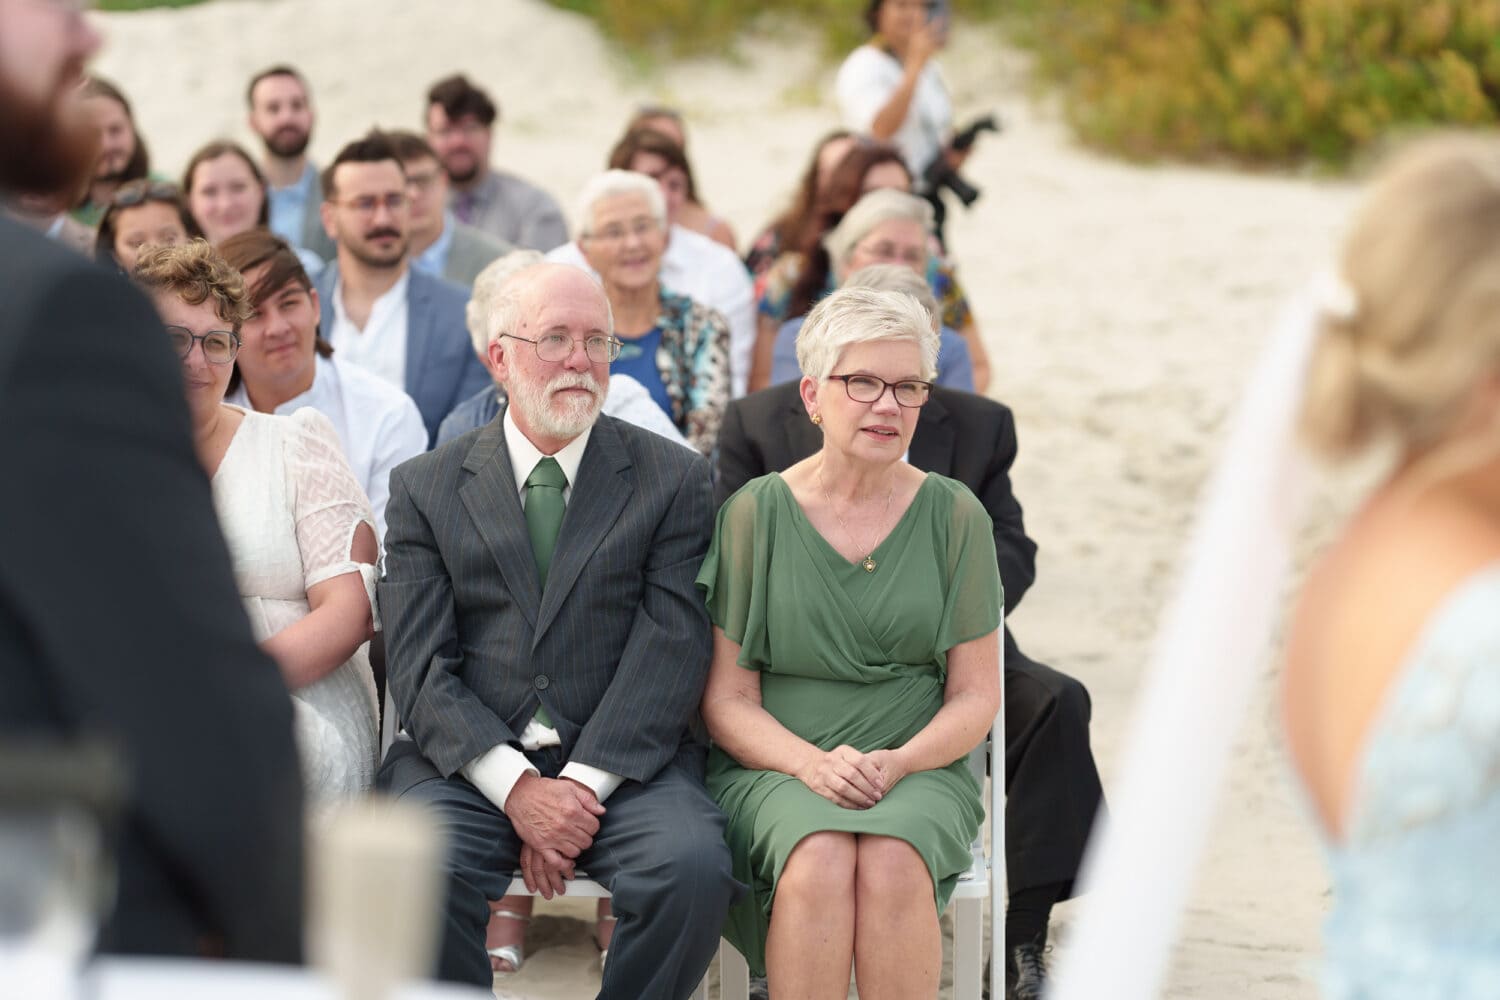 Pictures of the parents during the ceremony - Hilton Myrtle Beach Resort